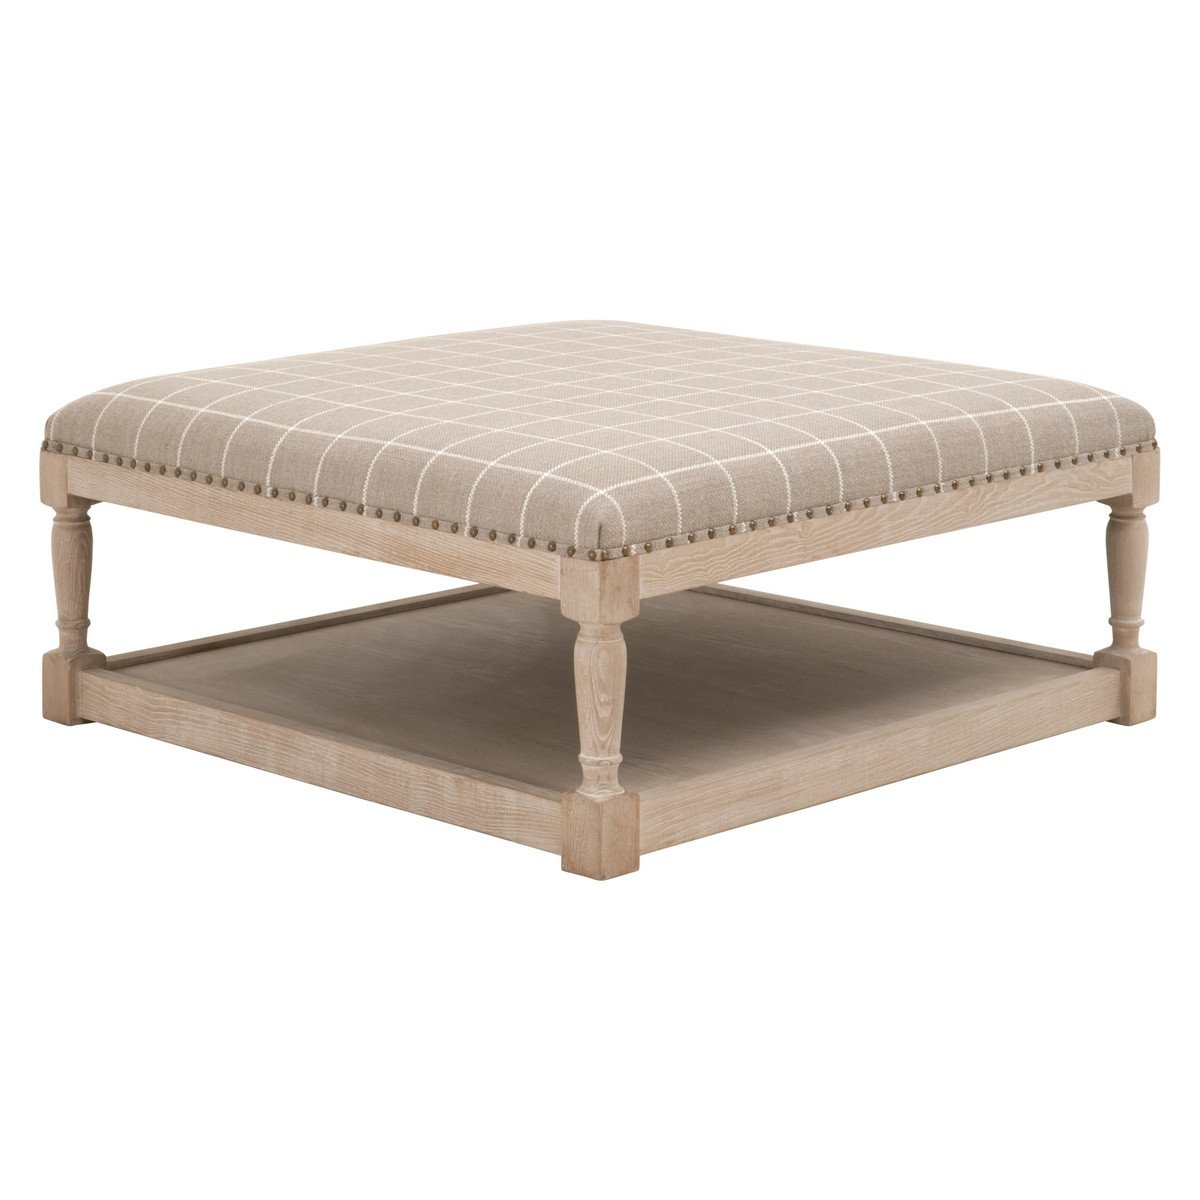 Townsend Upholstered Coffee Table, Pebble - Image 2